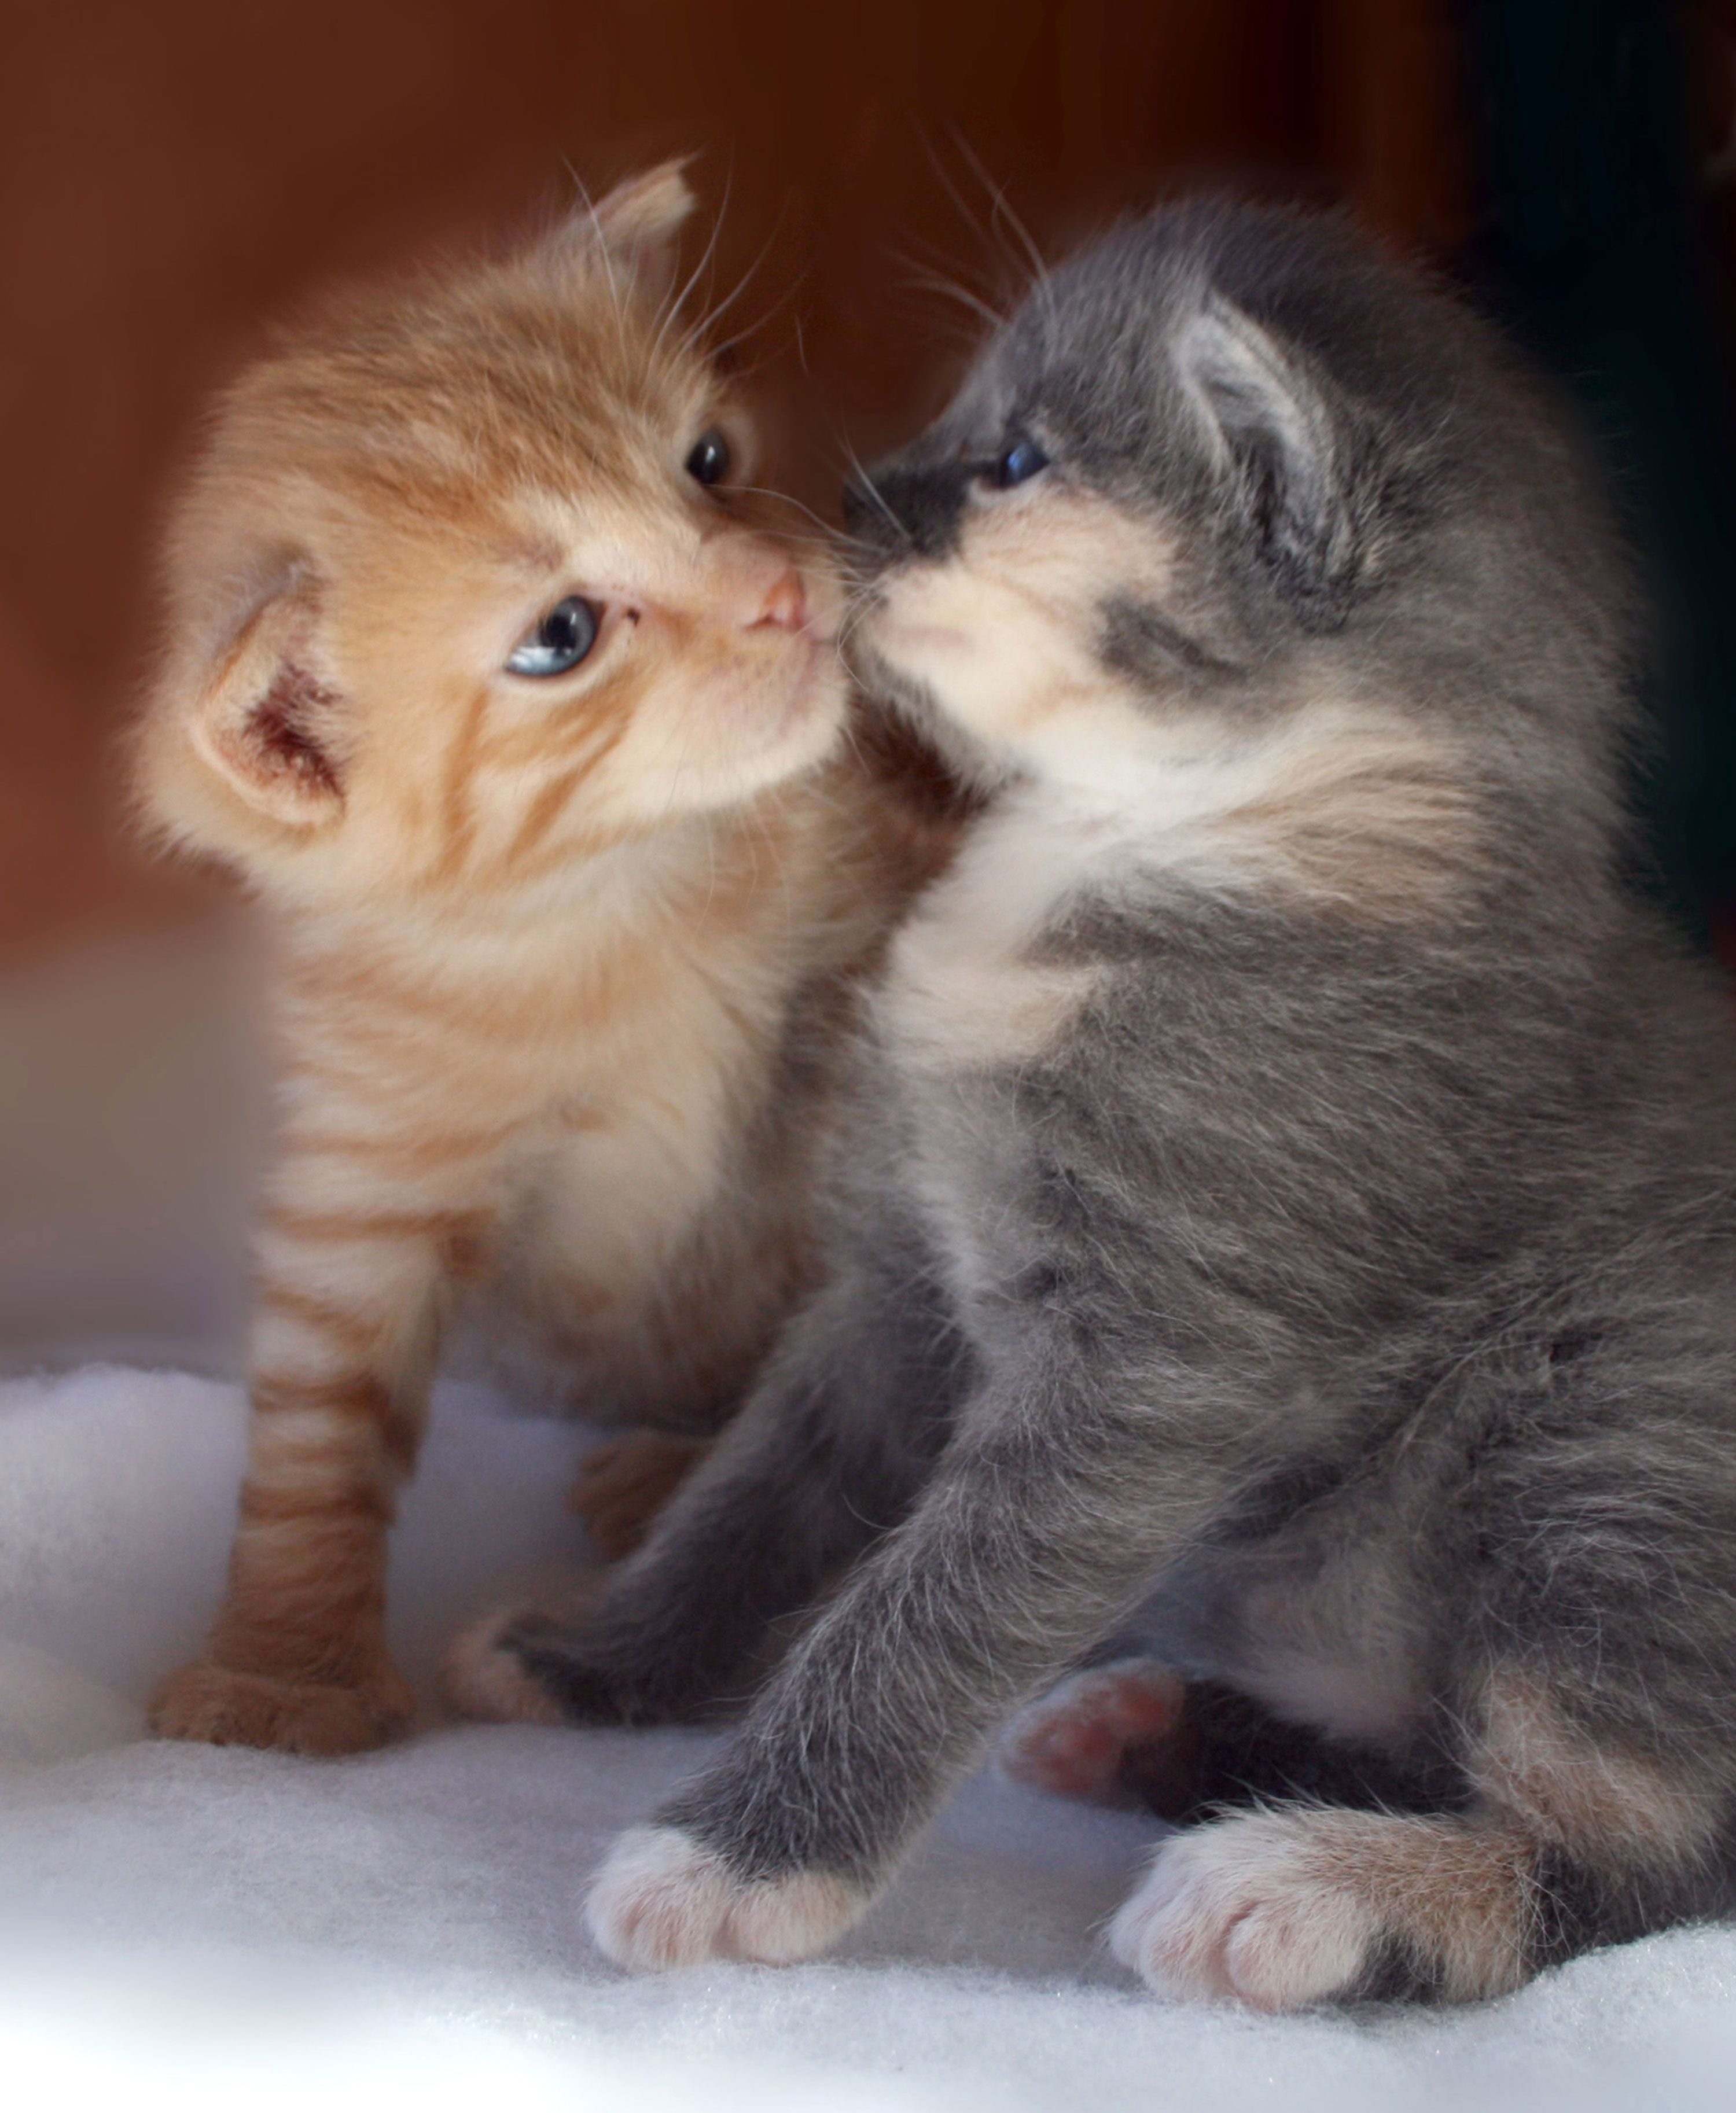 These two kittens are in love and the 